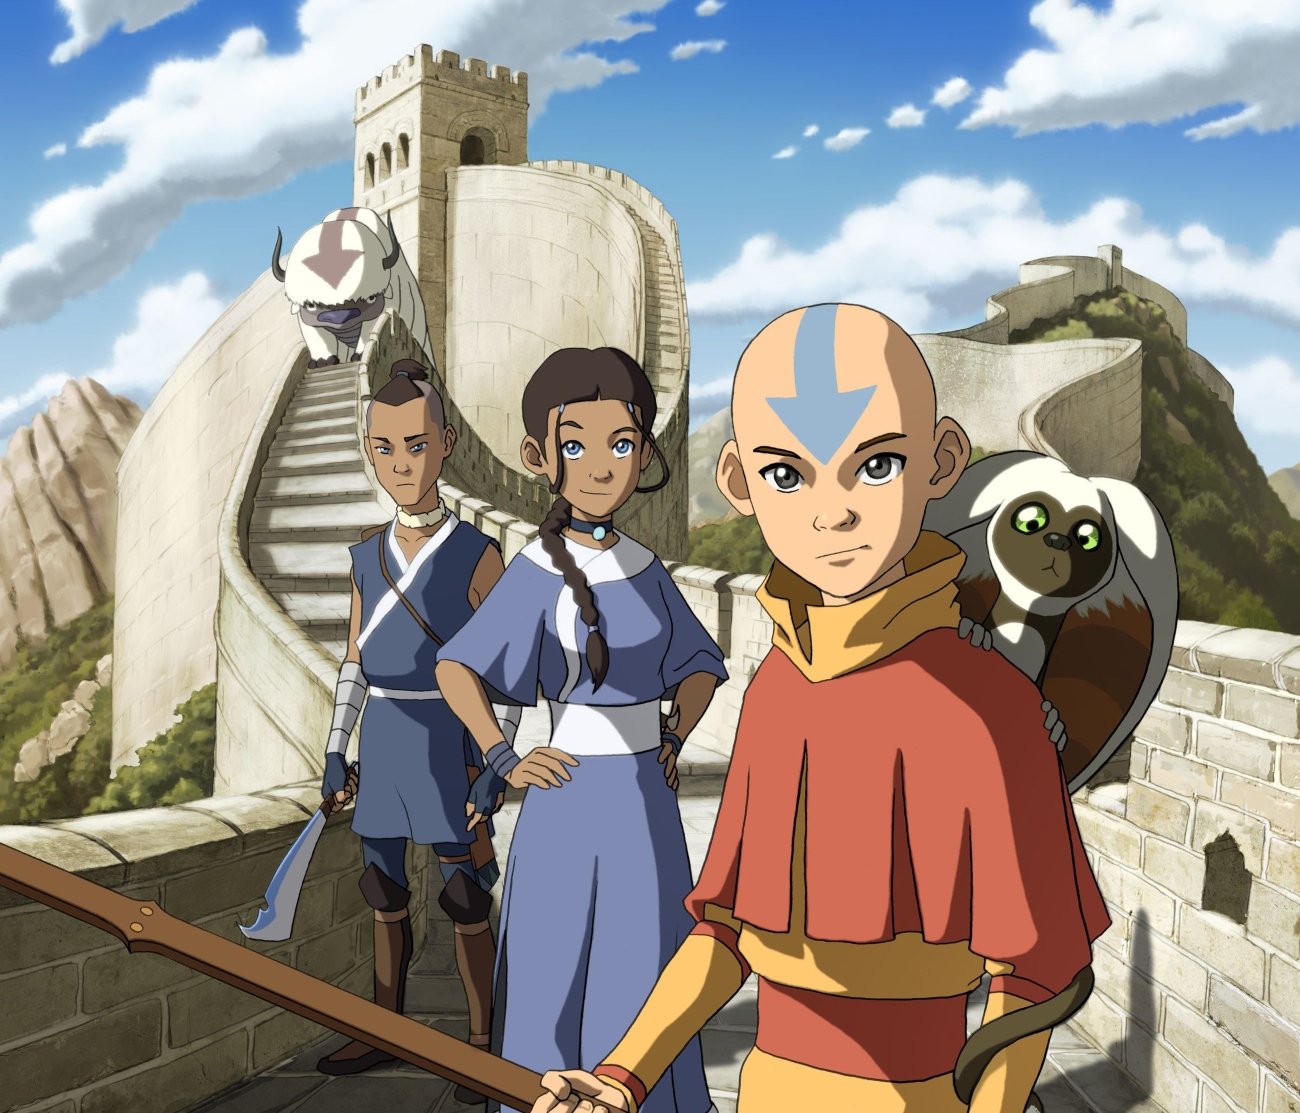 The Fighting styles of Avatar: The Last Airbender – From the